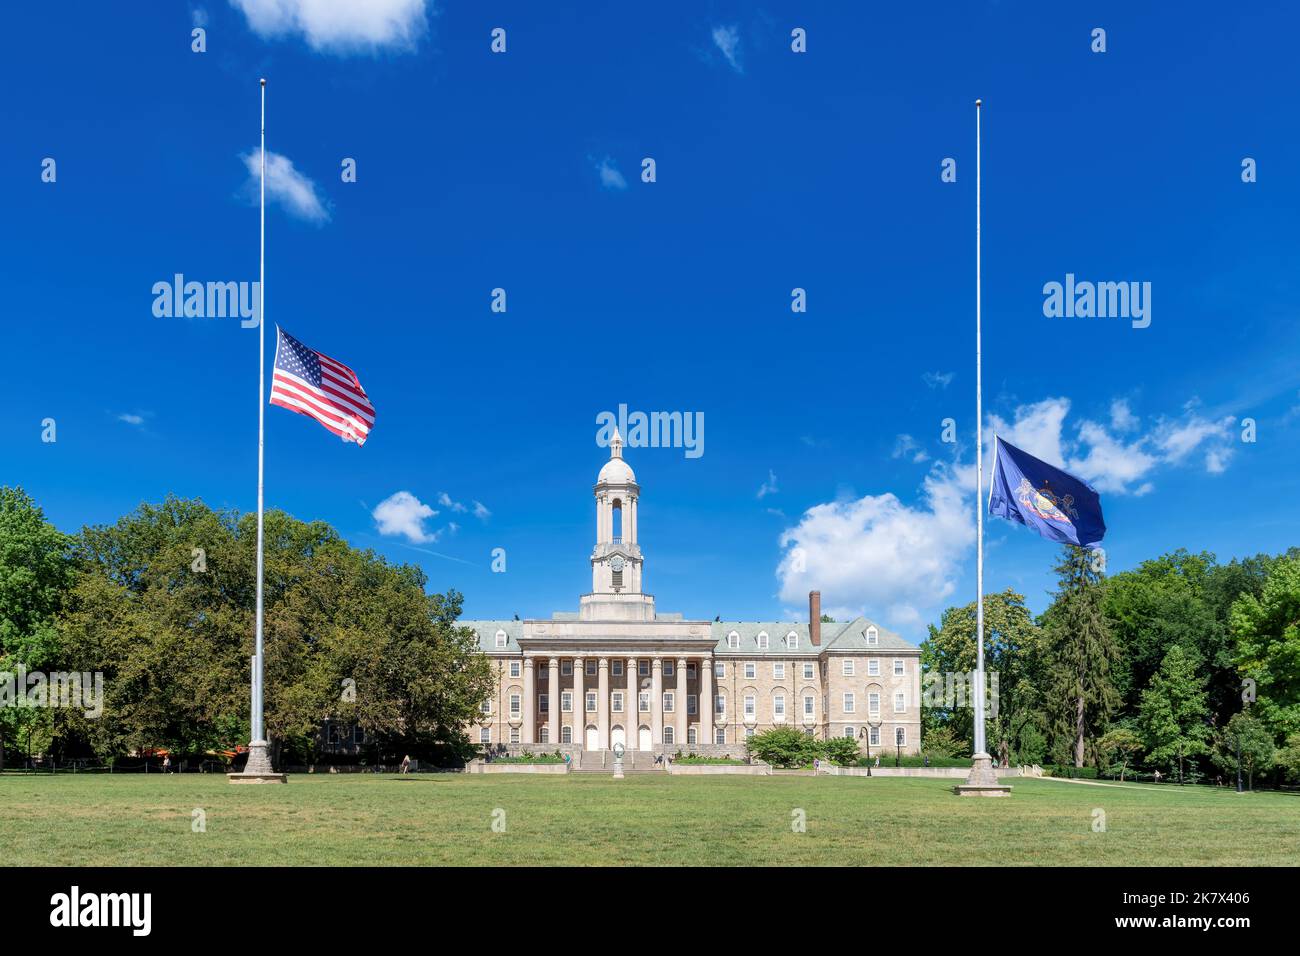 The Old Main building on the campus of Penn State University in sunny day, State College, Pennsylvania. Stock Photo